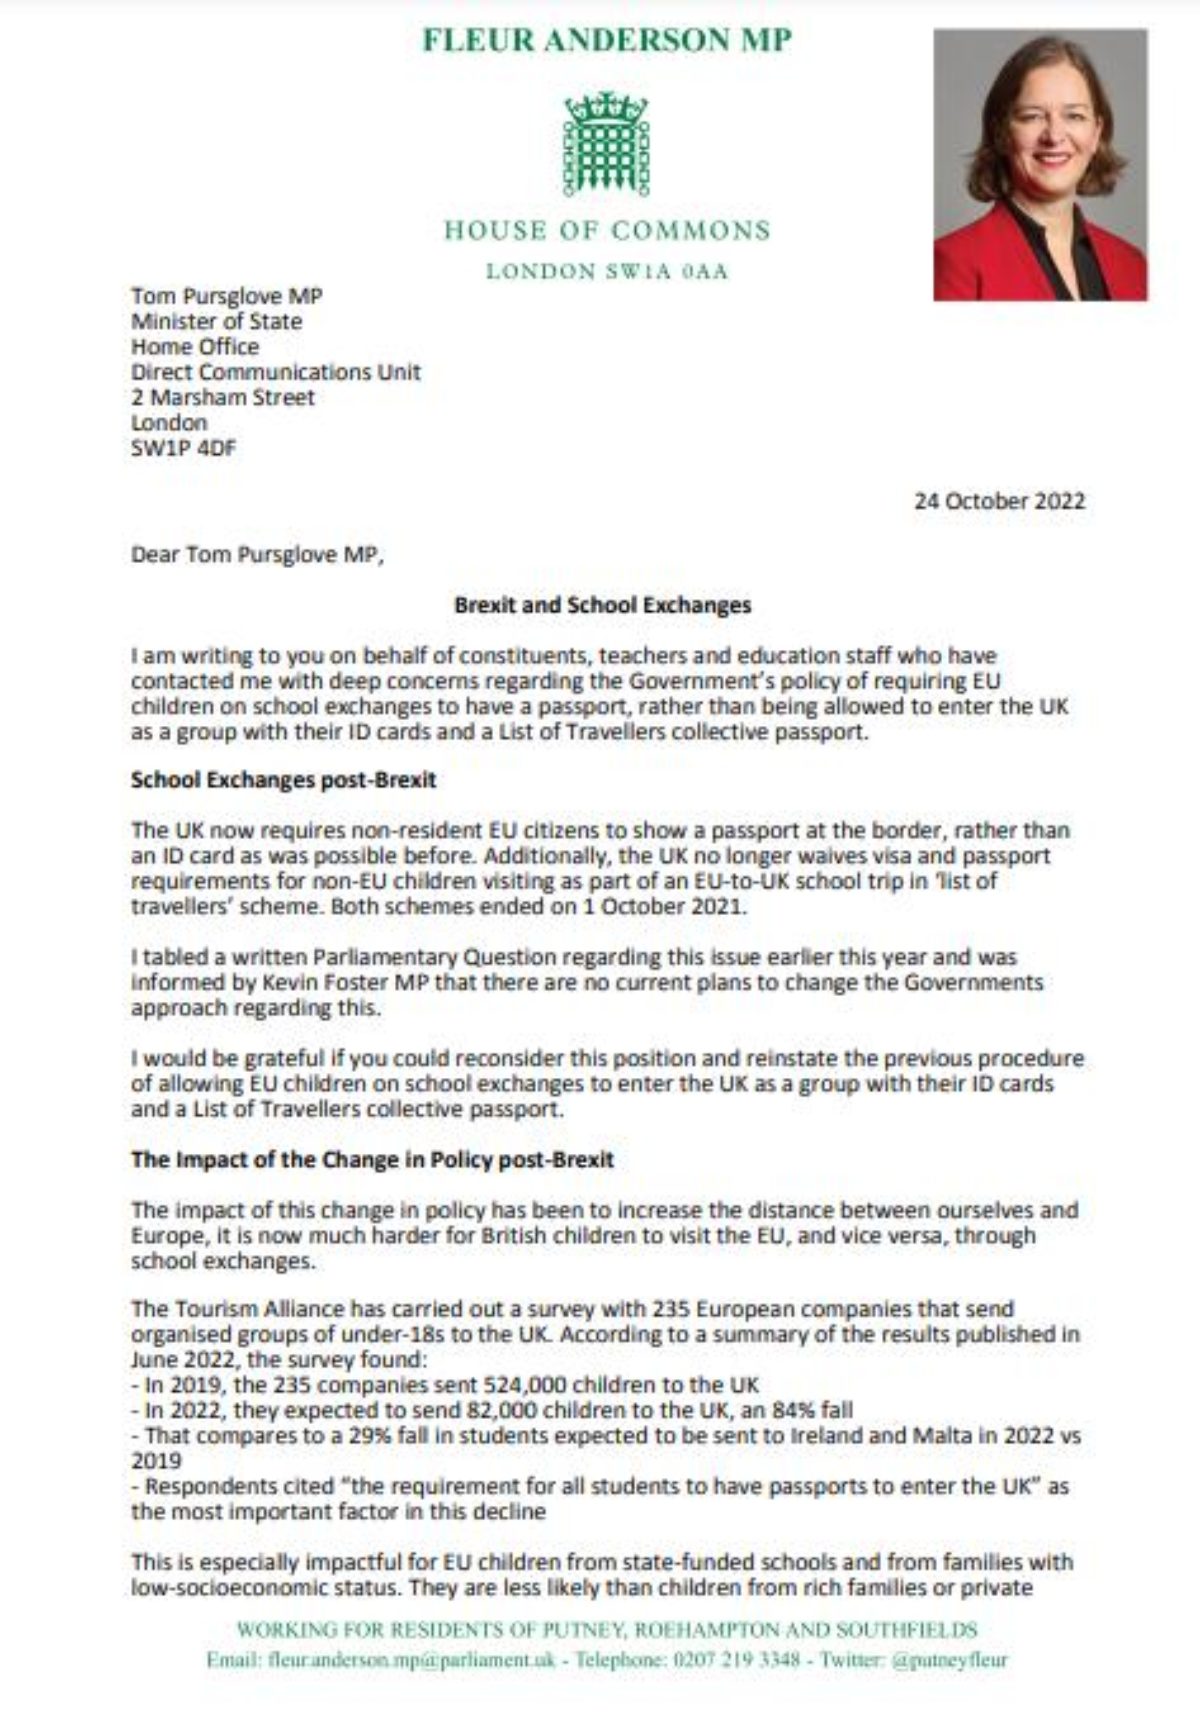 A letter from Fleur Anderson MP to Tom Pursglove MP regarding school exchanges post-Brexit. 